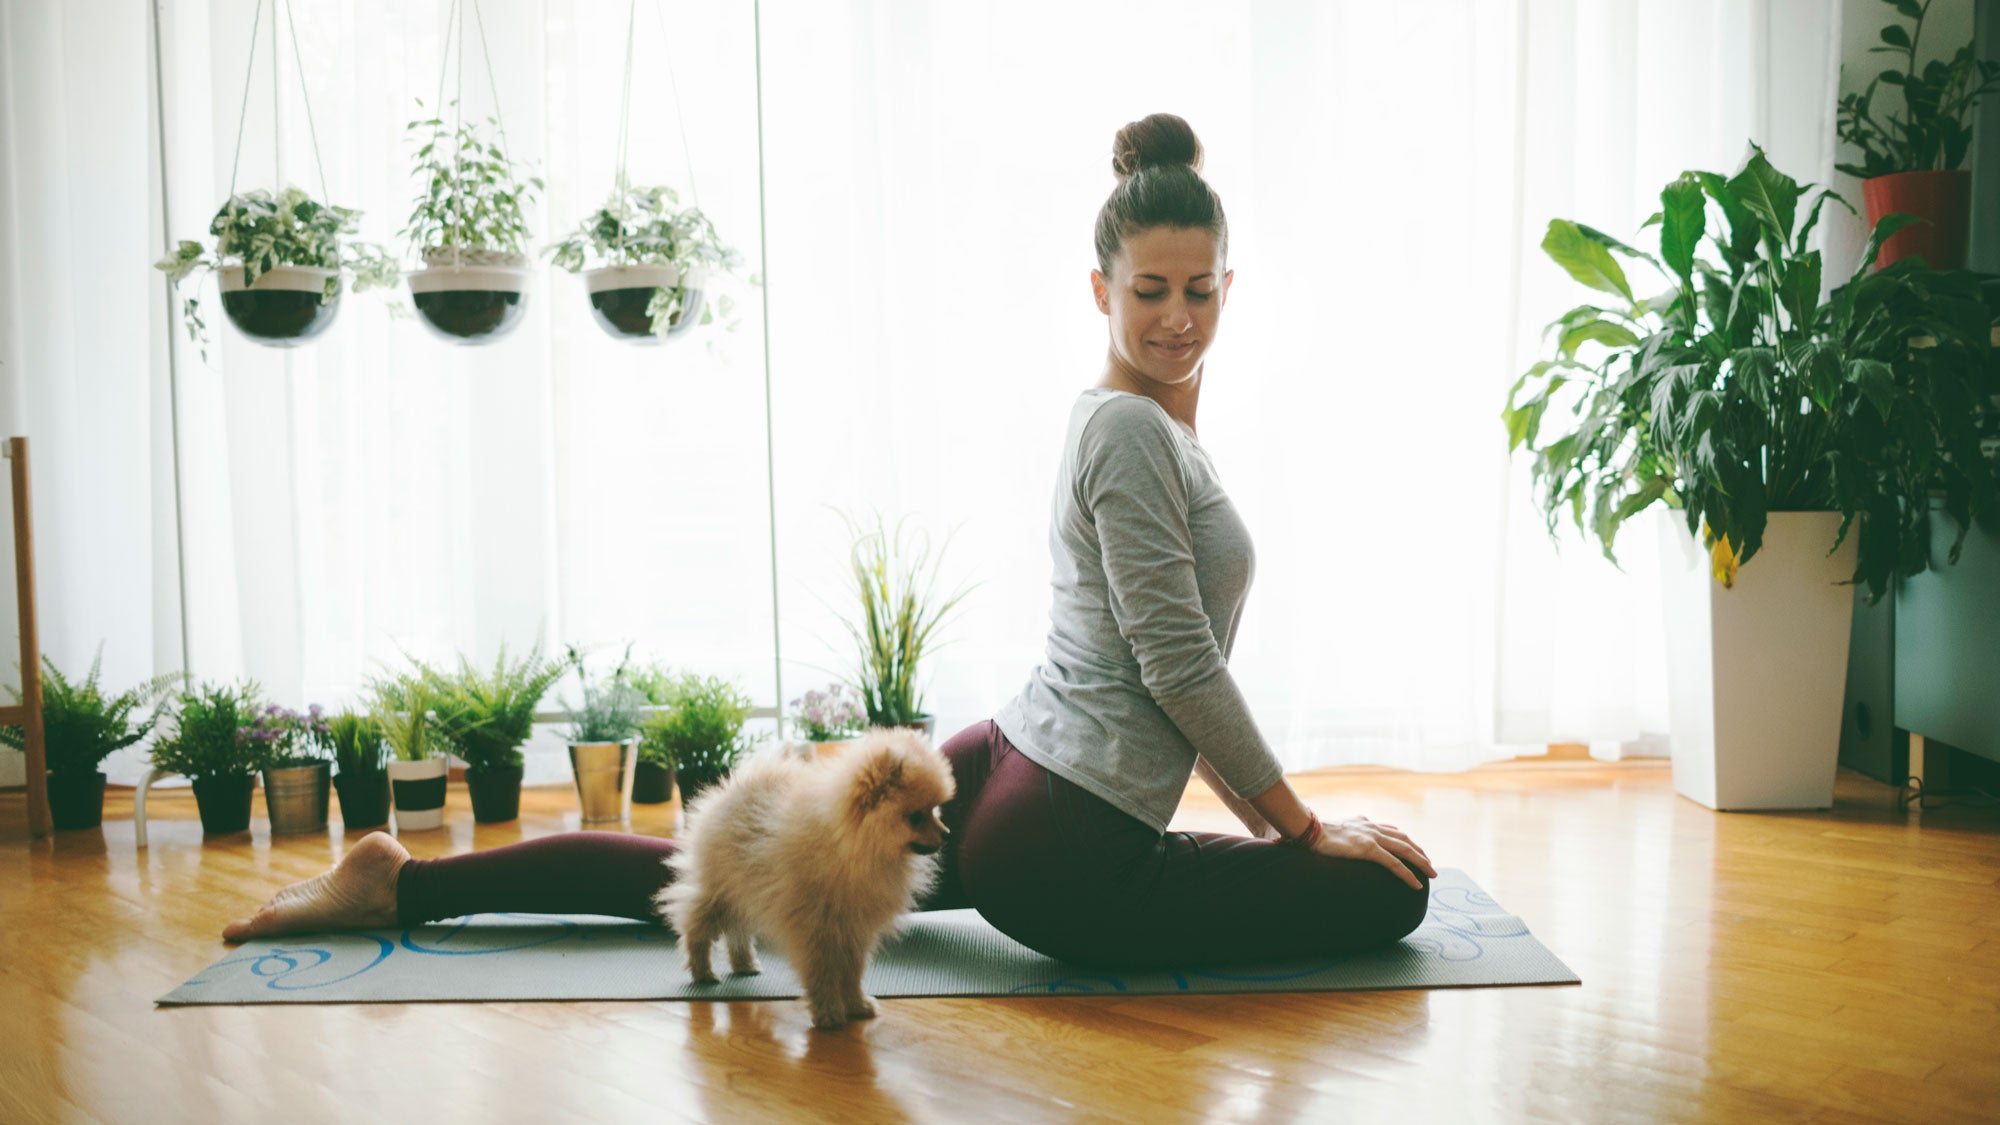 DIY Yoga Sanctuary: 5 Ways to Create Your Own Yoga Room at Home